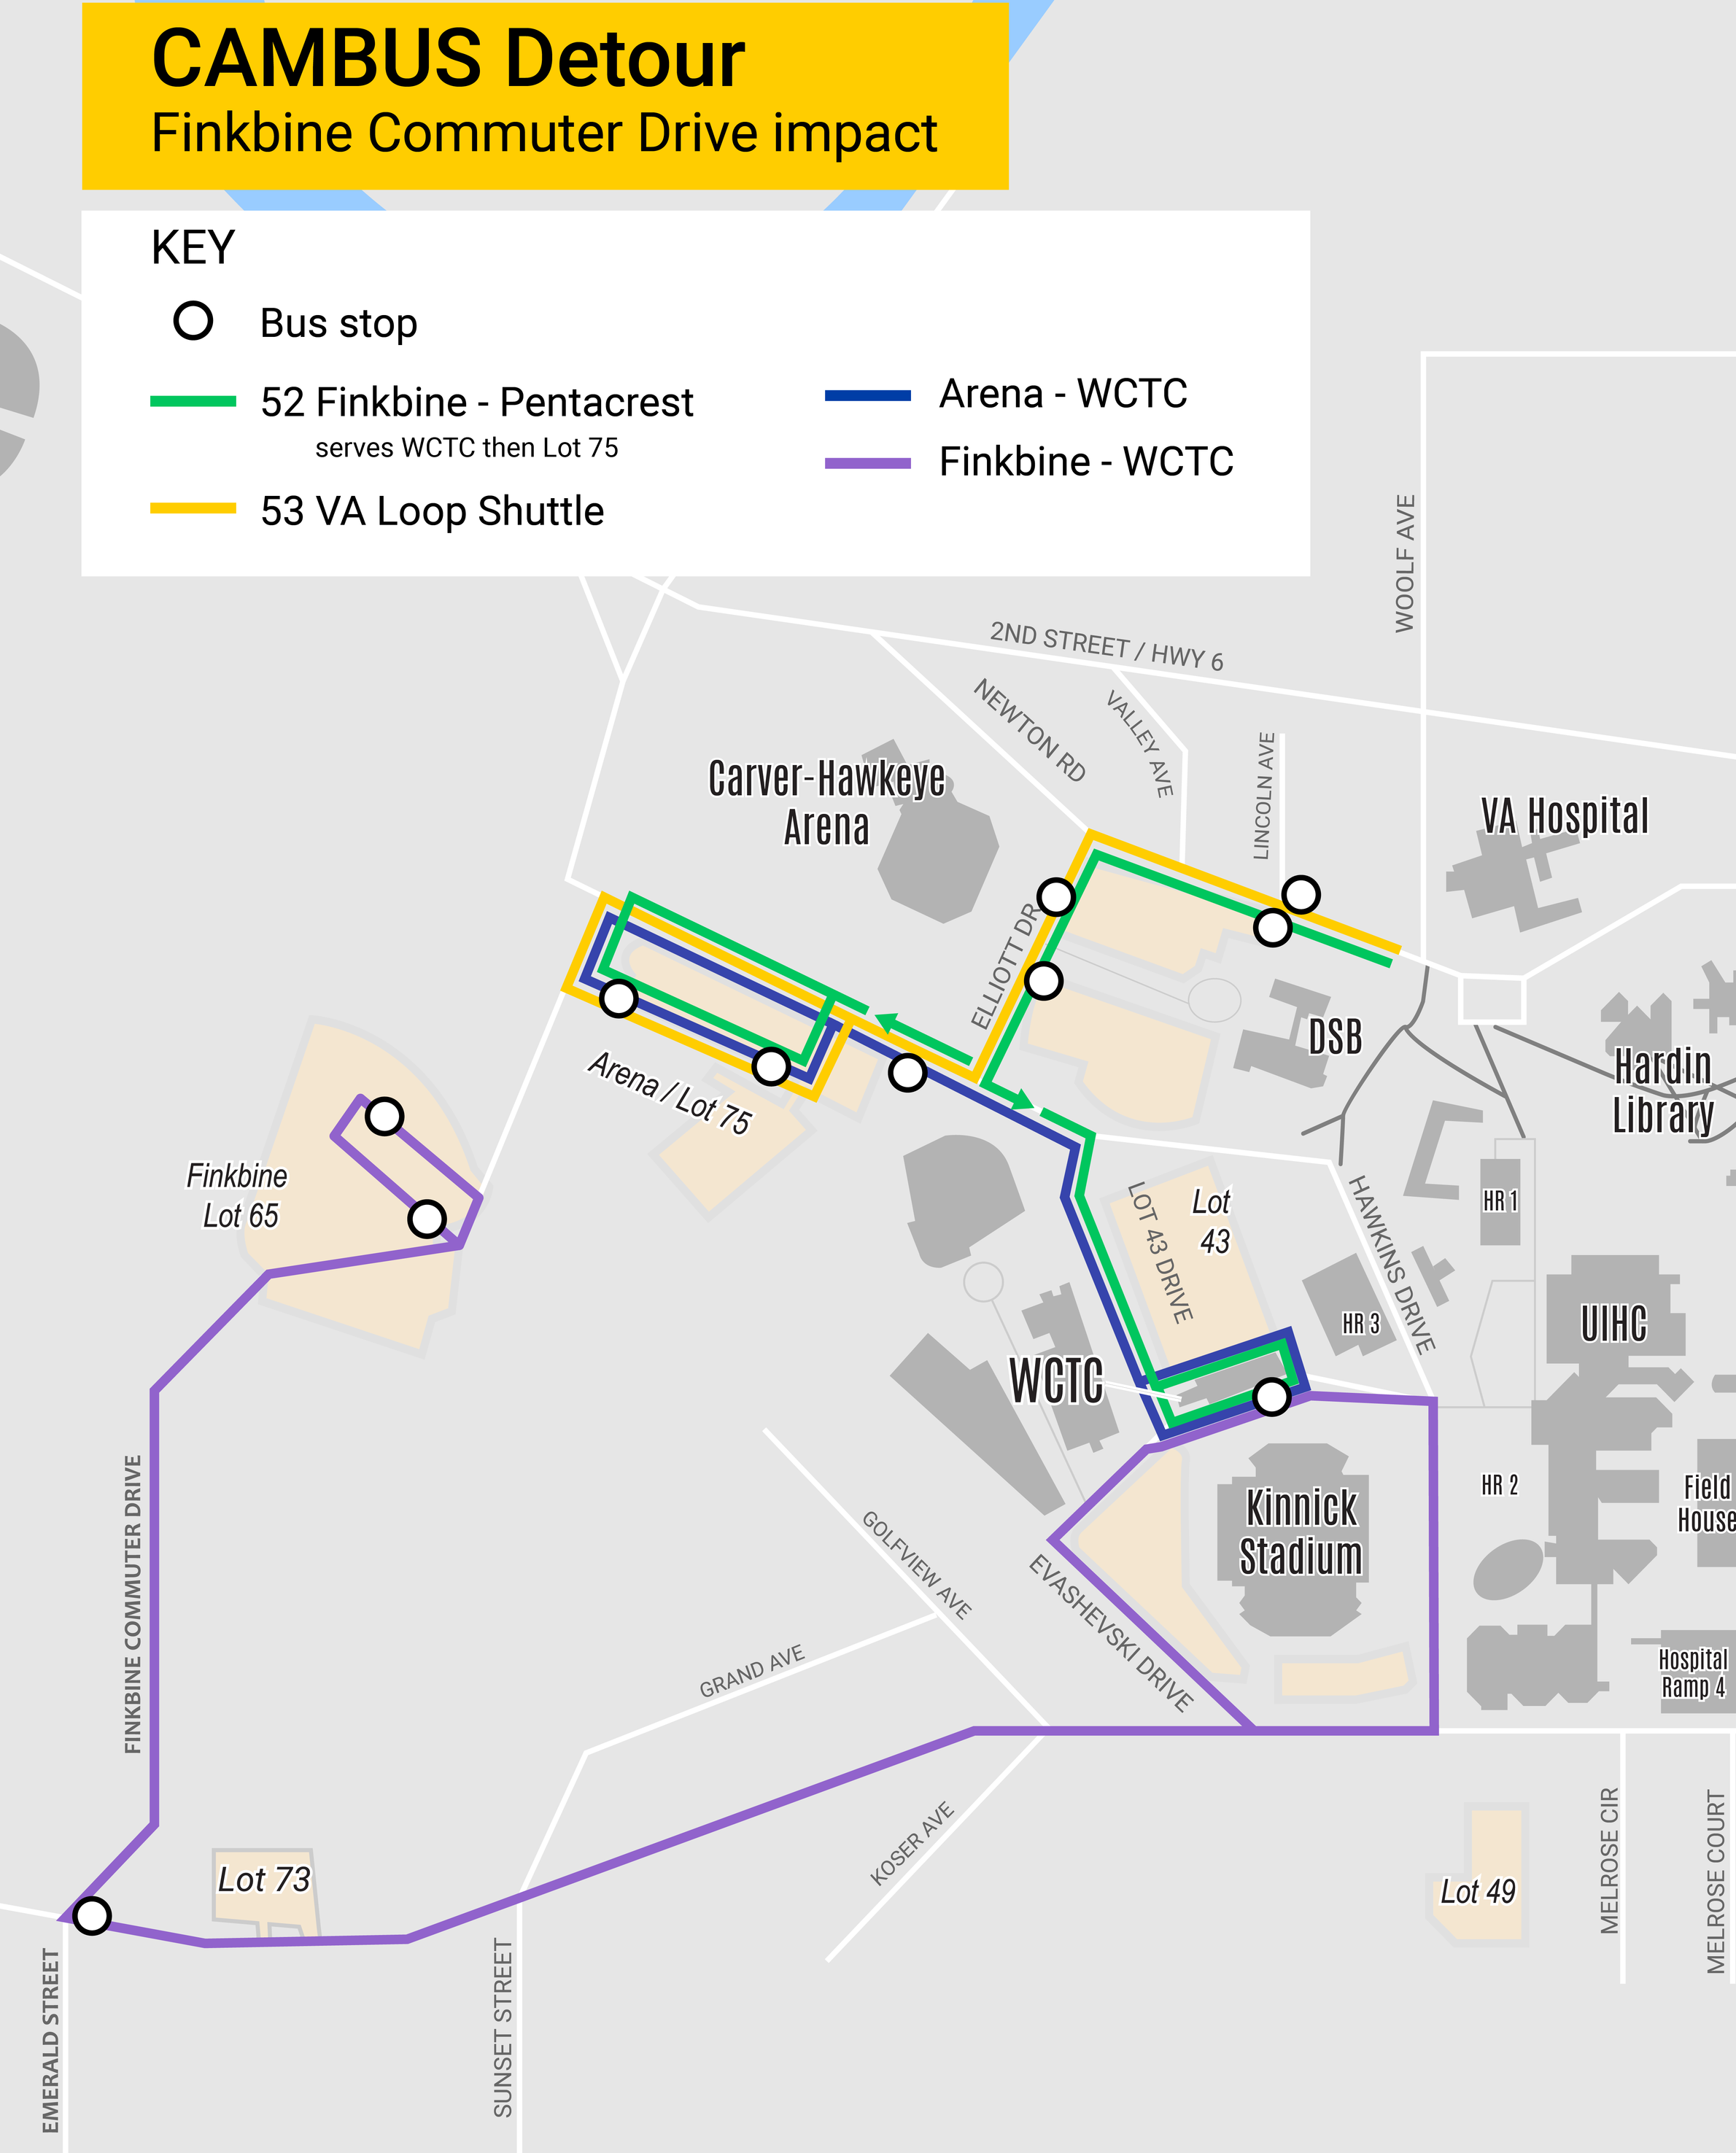 Map of detoured CAMBUS routes due to Finkbine Commuter Drive closure